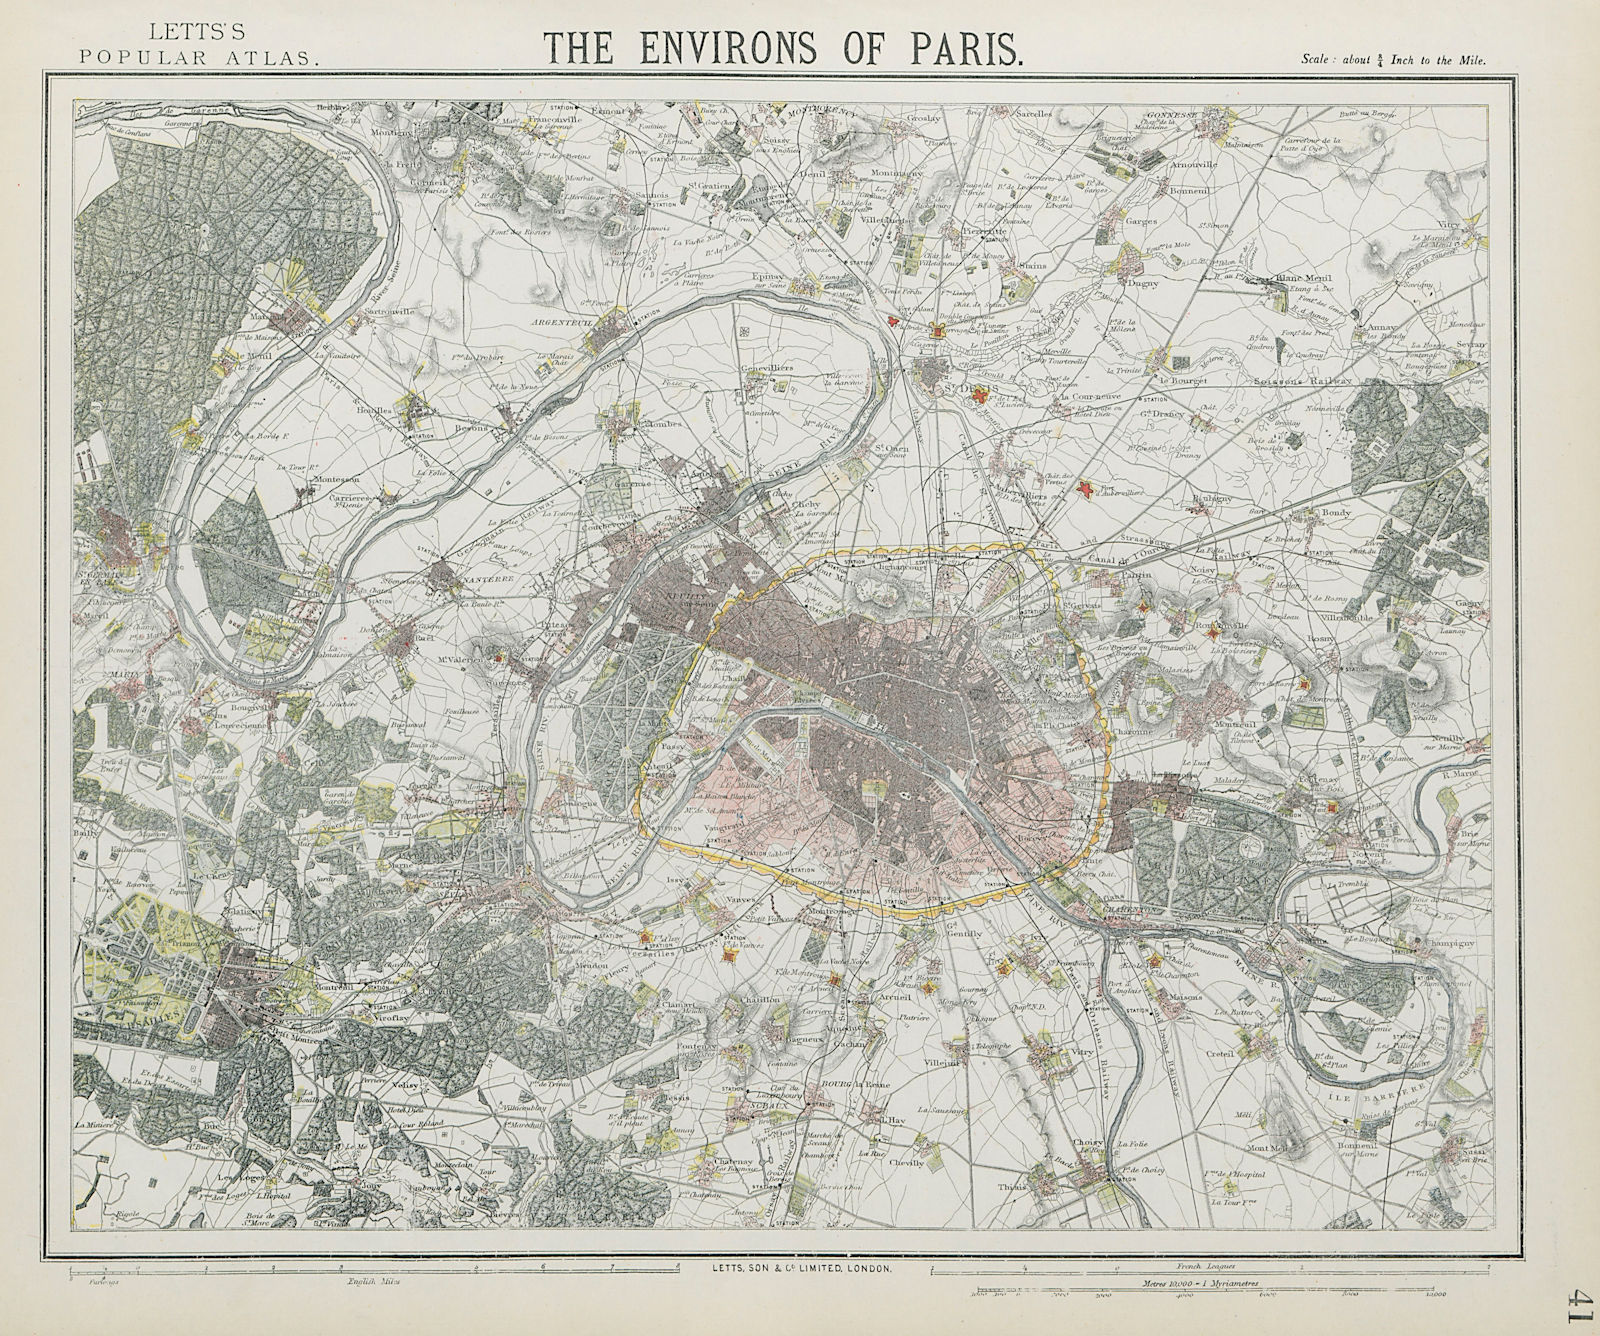 Associate Product PARIS ENVIRONS. Fortifications. Railways. Versailles. LETTS 1884 old map